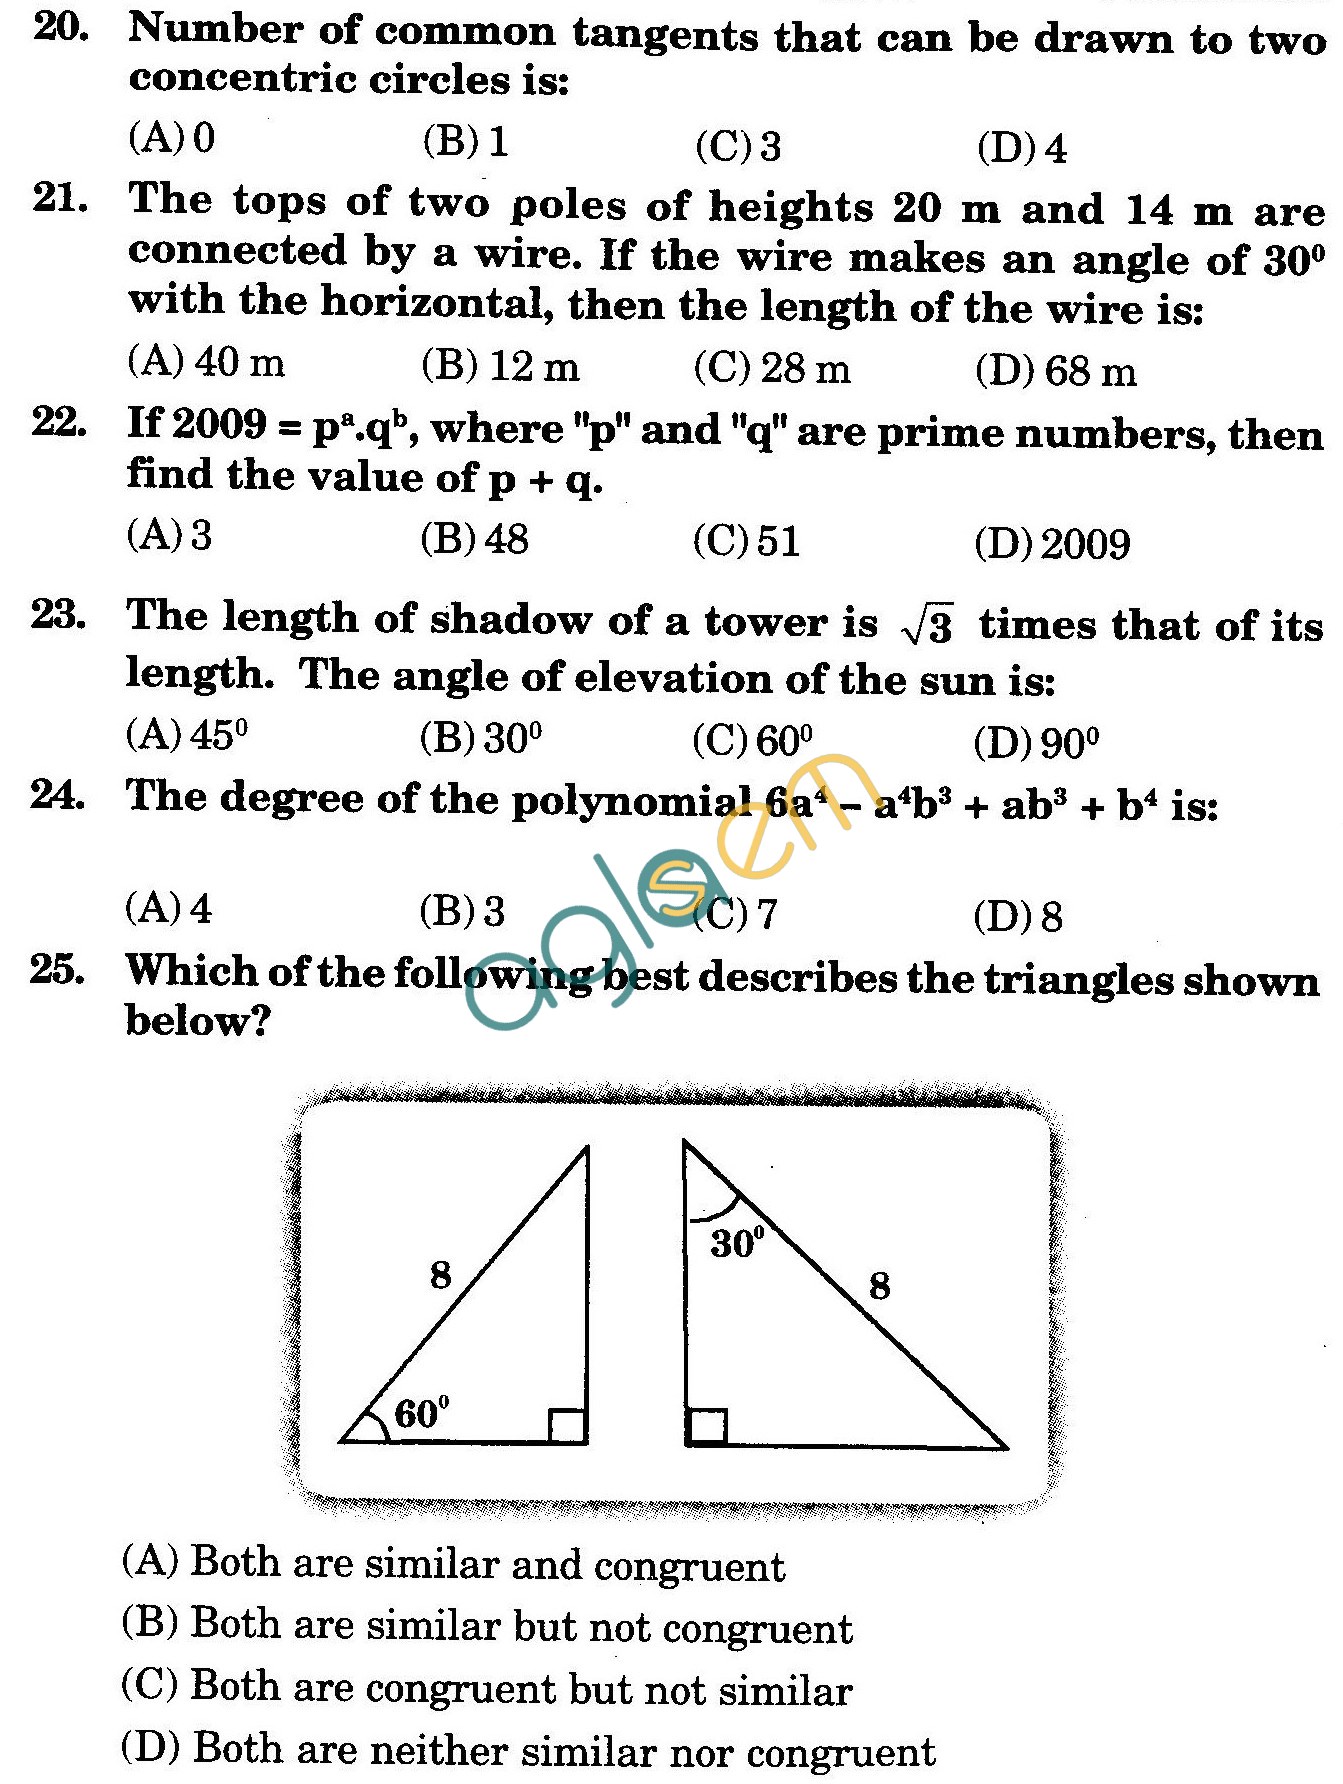 NSTSE 2009 Class X Question Paper with Answers - Mathematics